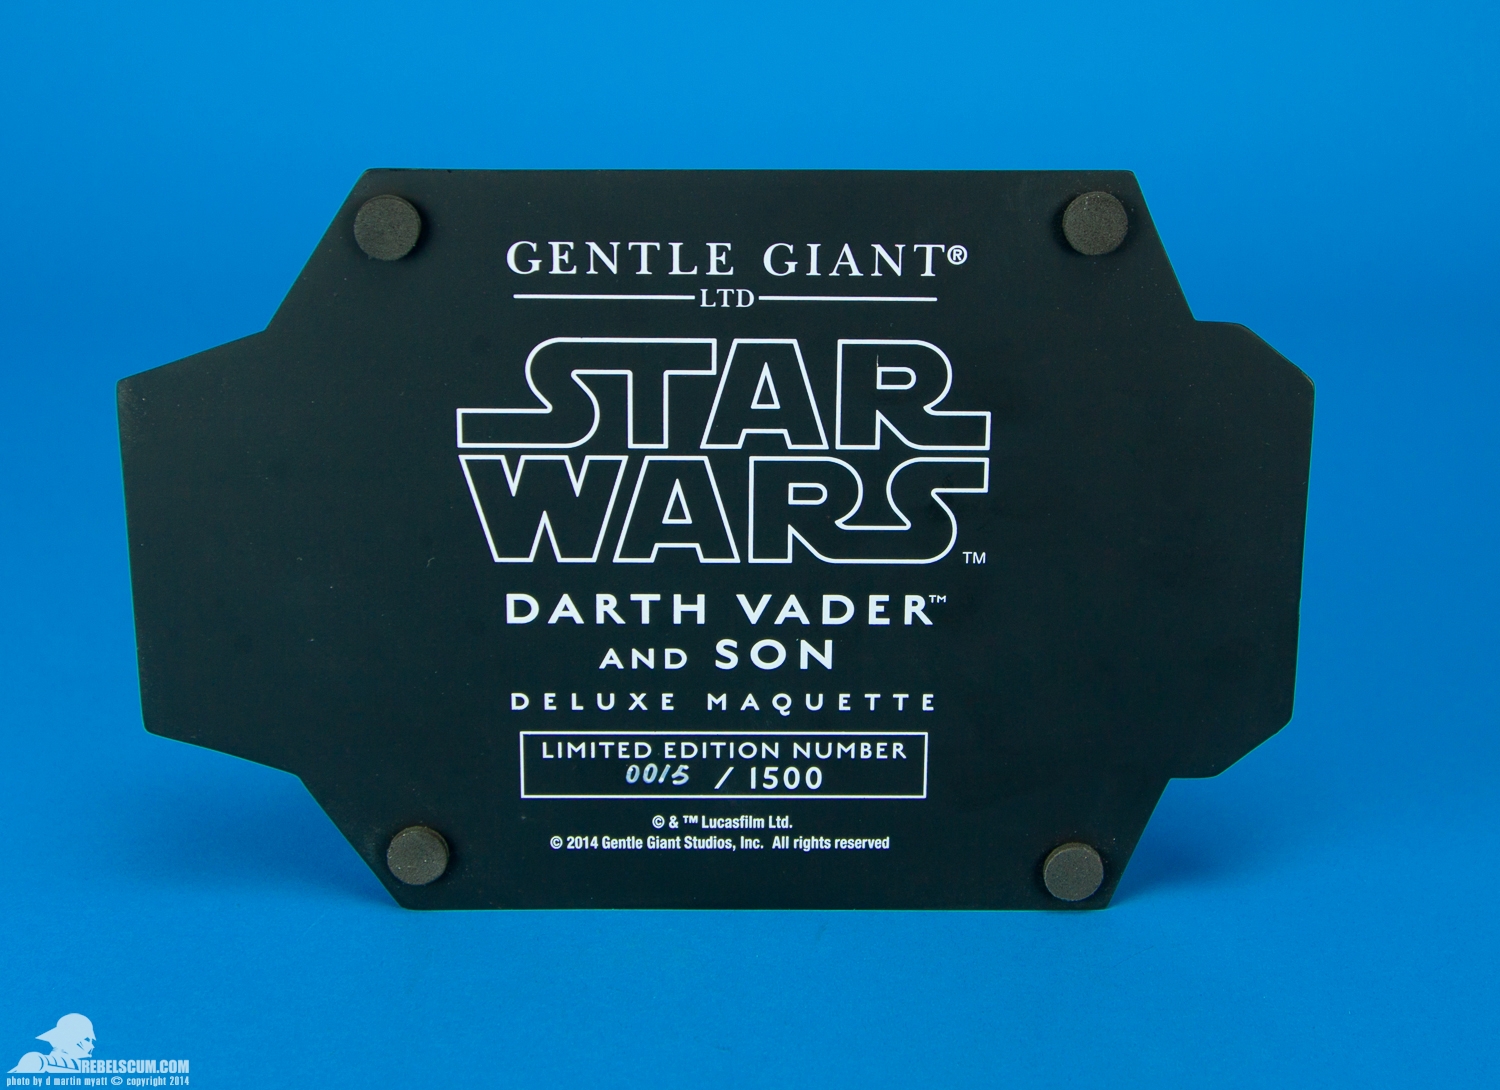 Darth-Vader-And-Son-Deluxe-Maquette-Gentle-Giant-Ltd-015.jpg